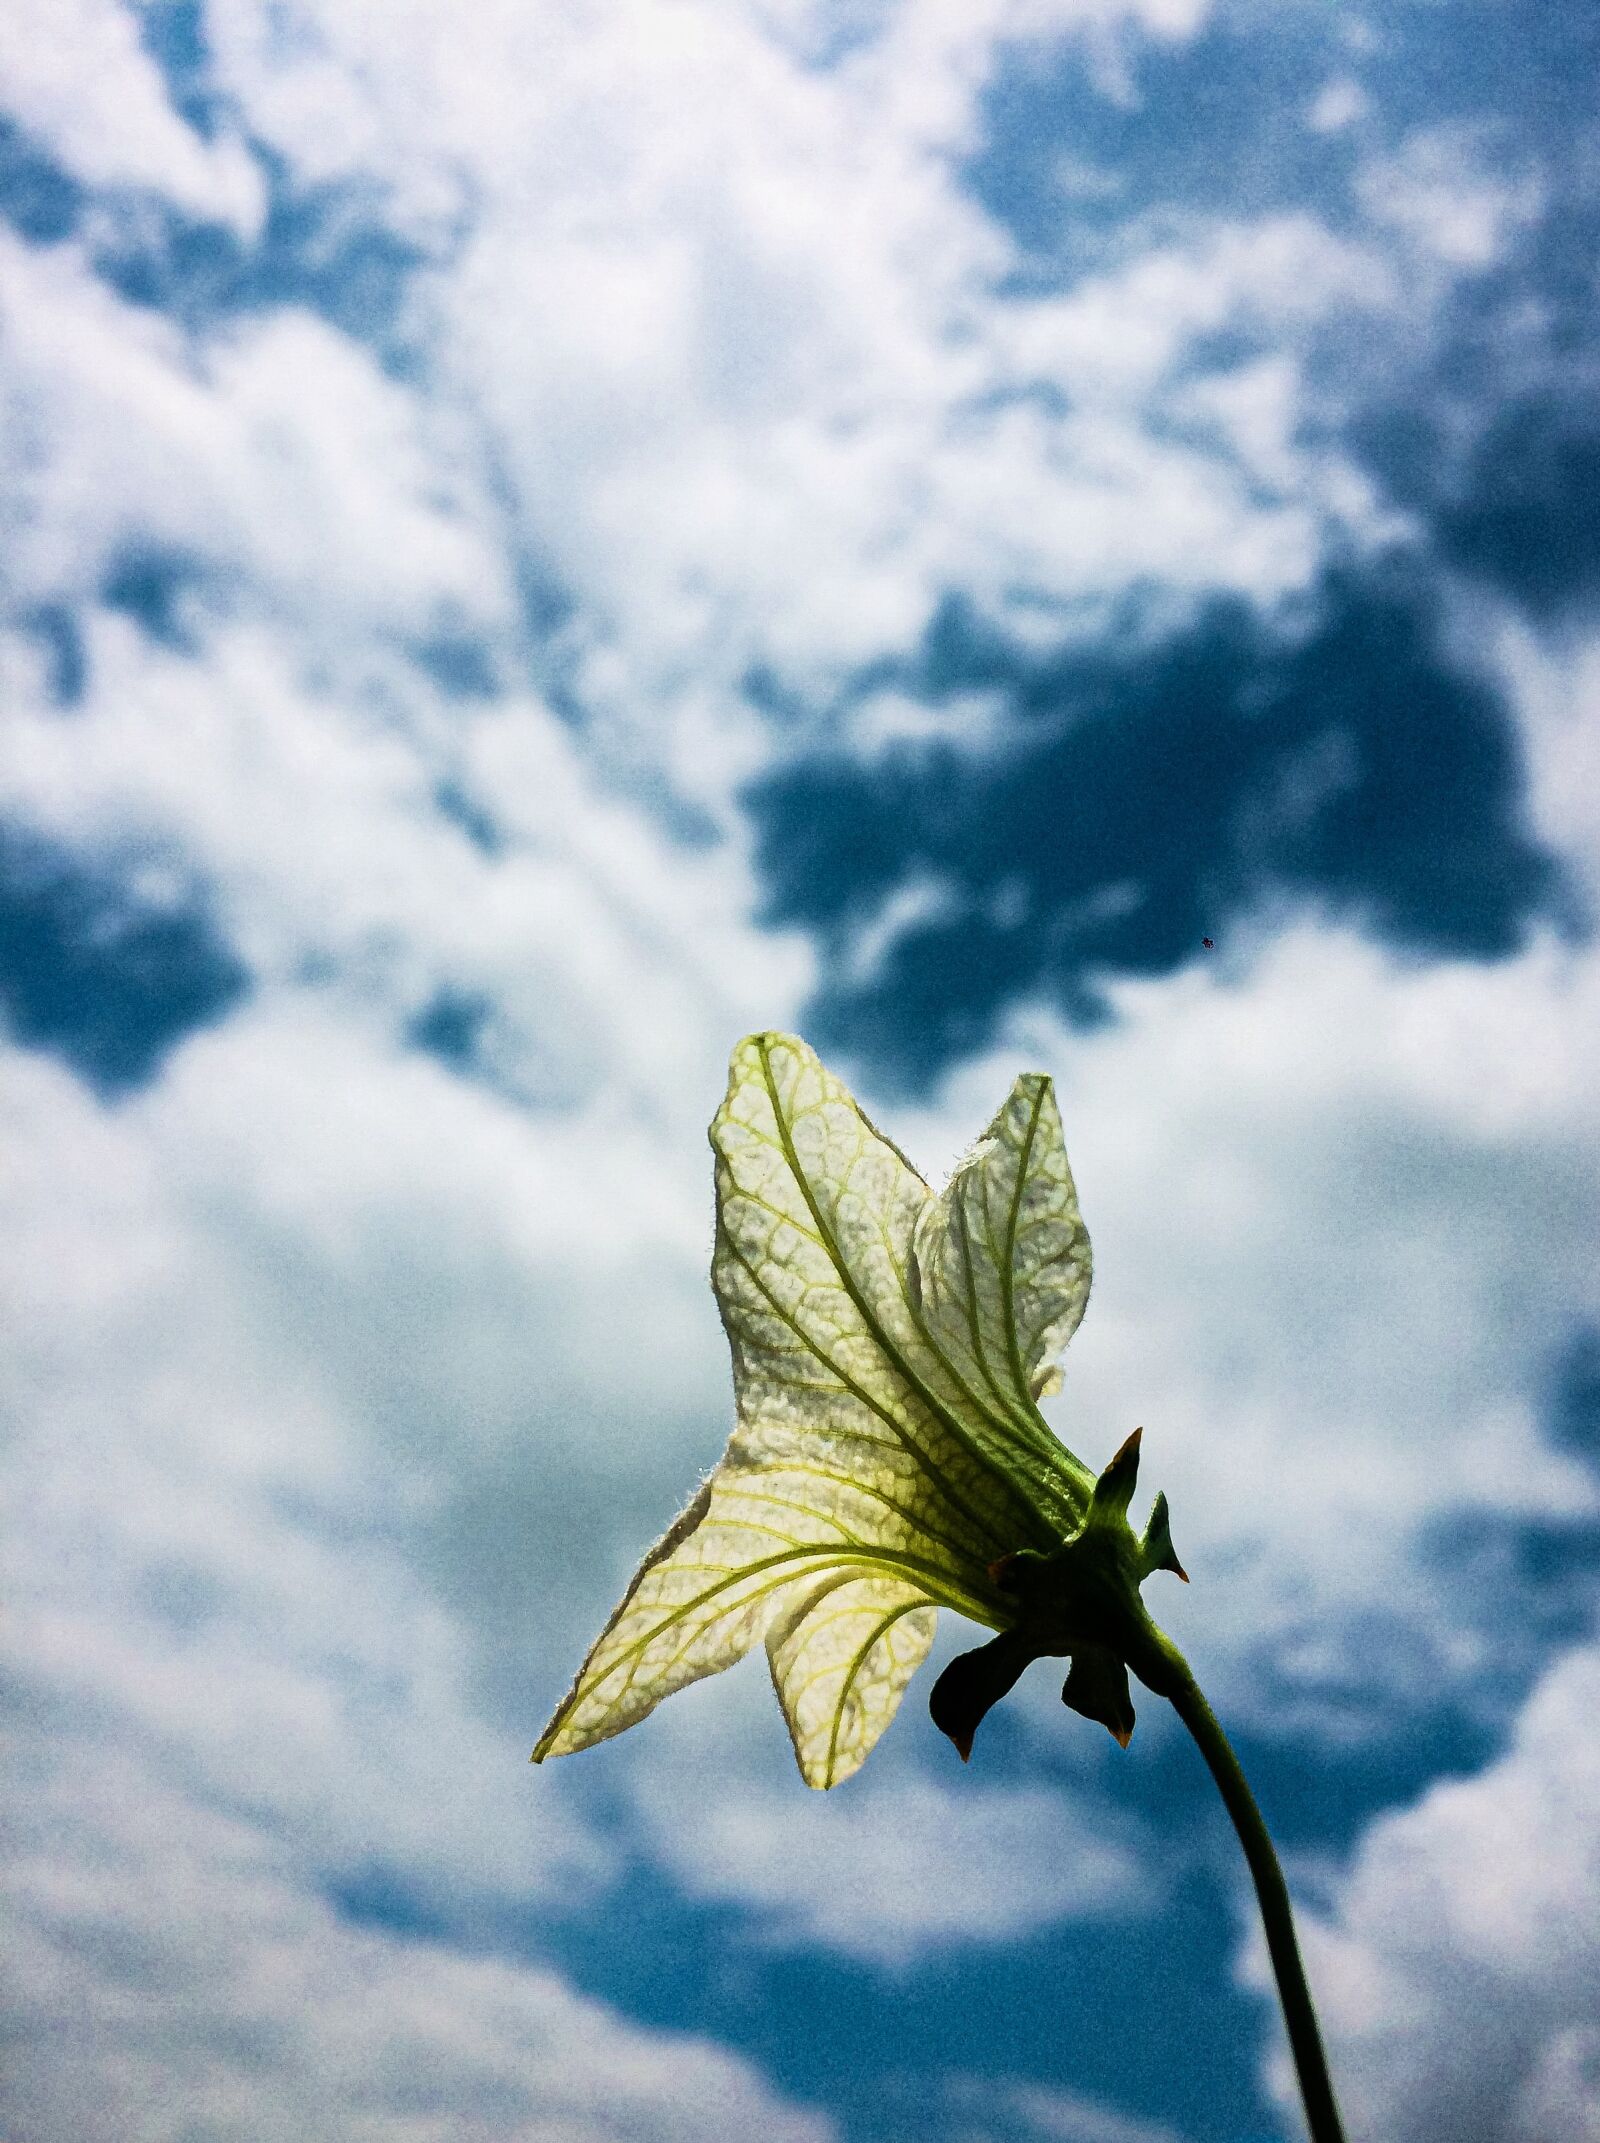 Apple iPhone 5s sample photo. Flower, nature beauty, weather photography